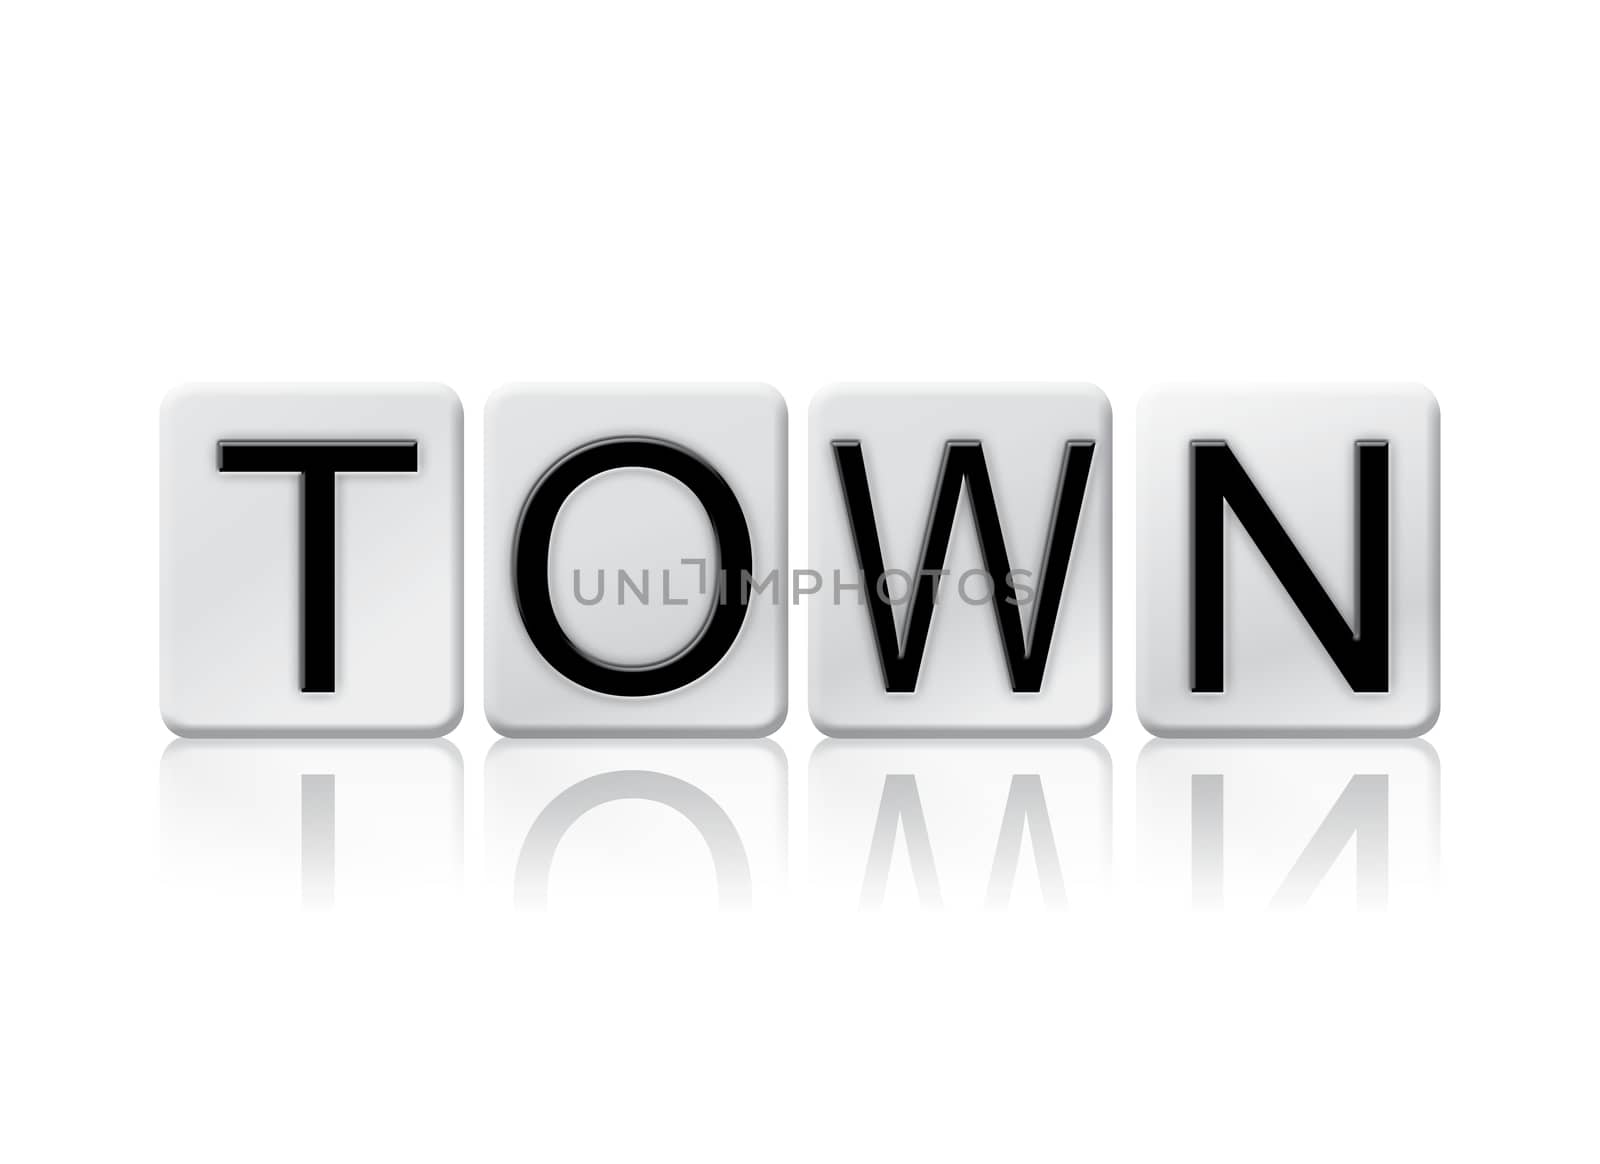 The word "Town" written in tile letters isolated on a white background.